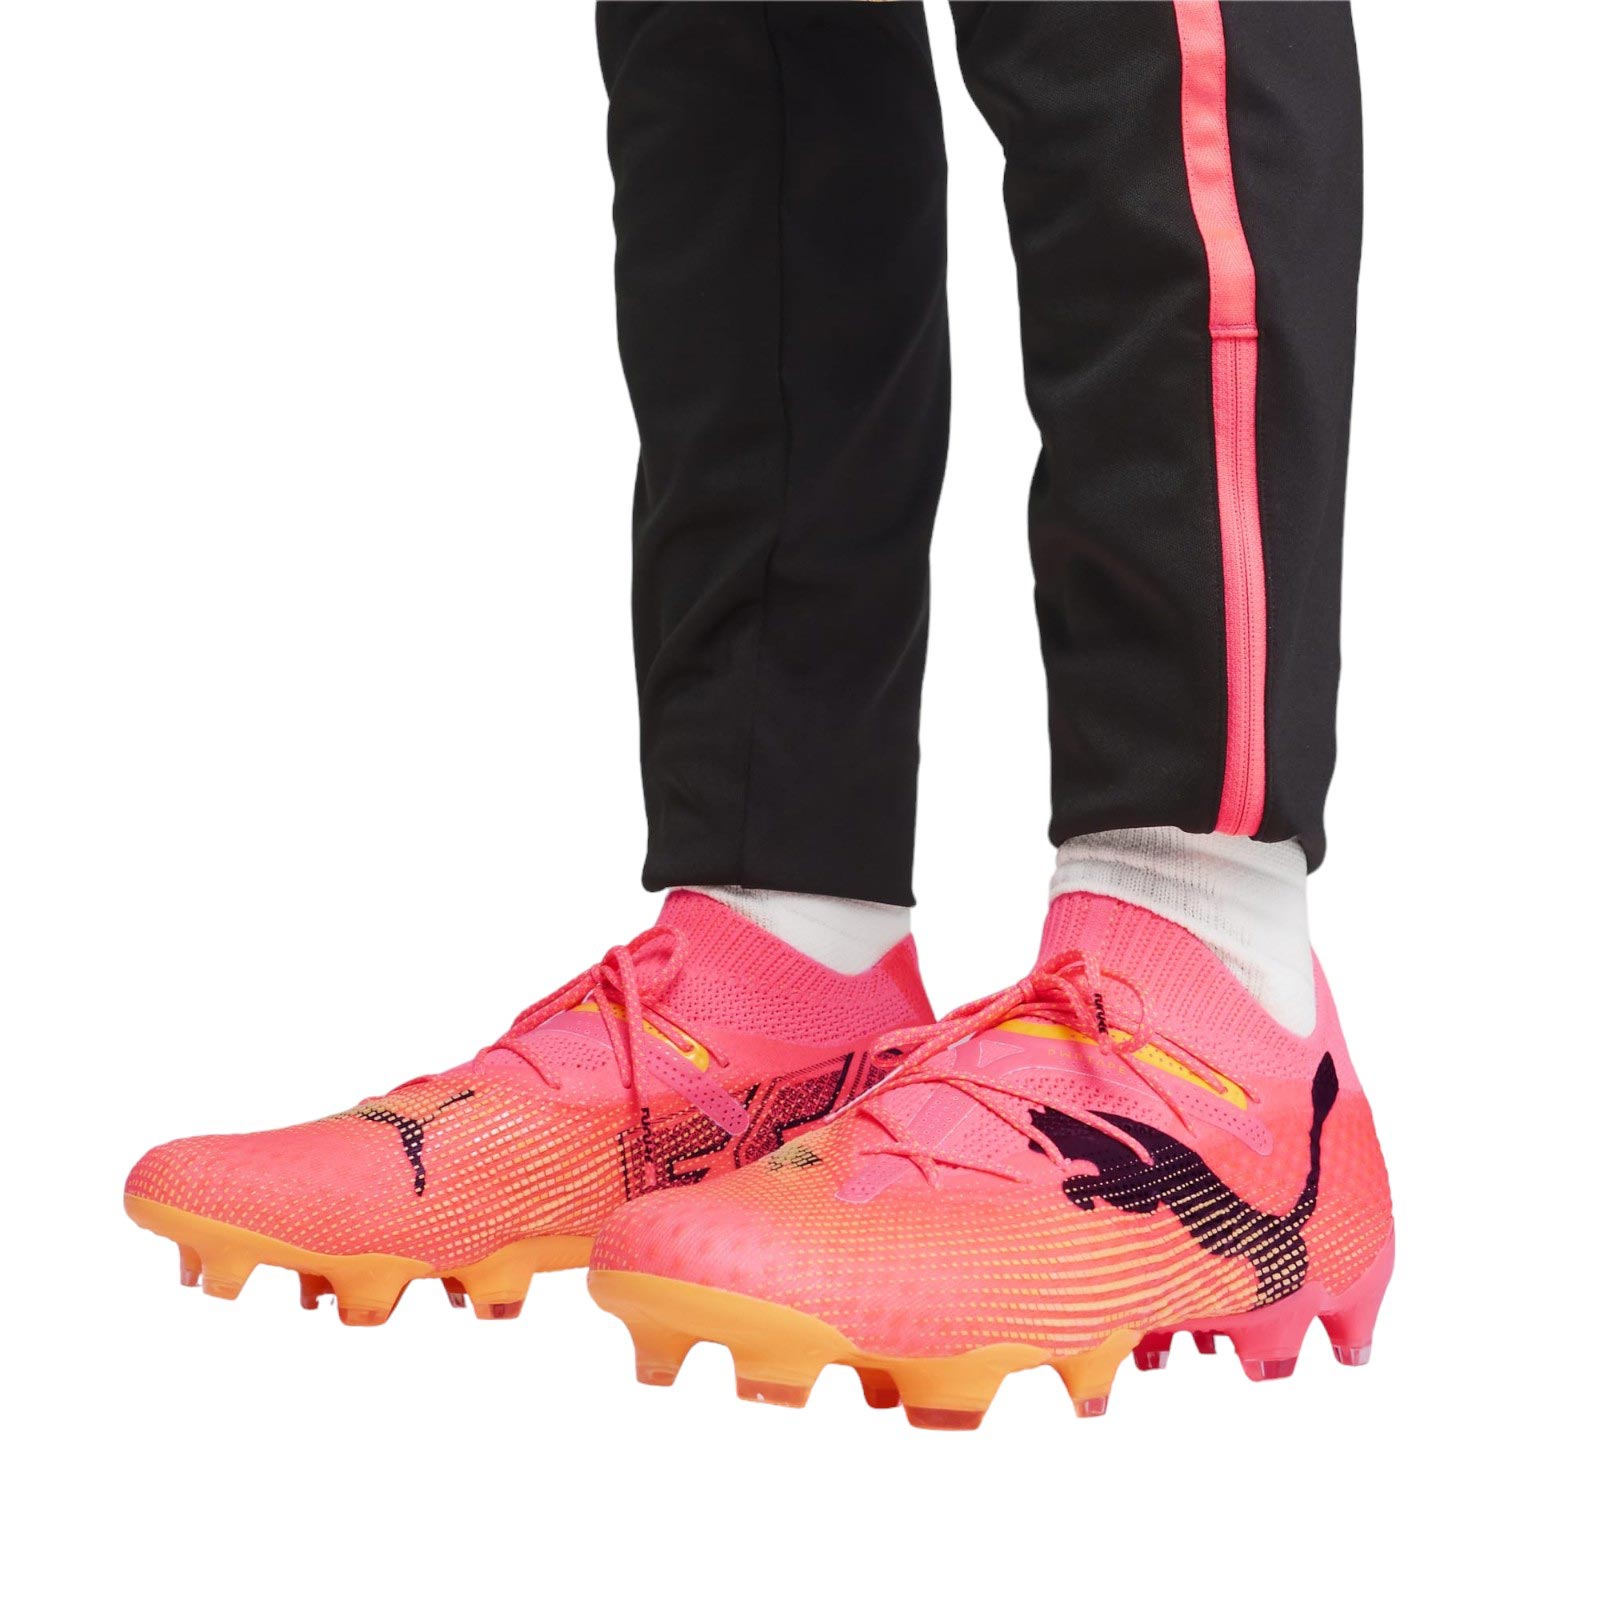 PUMA FUTURE 7 ULTIMATE WOMENS FIRM GROUND FOOTBALL BOOTS